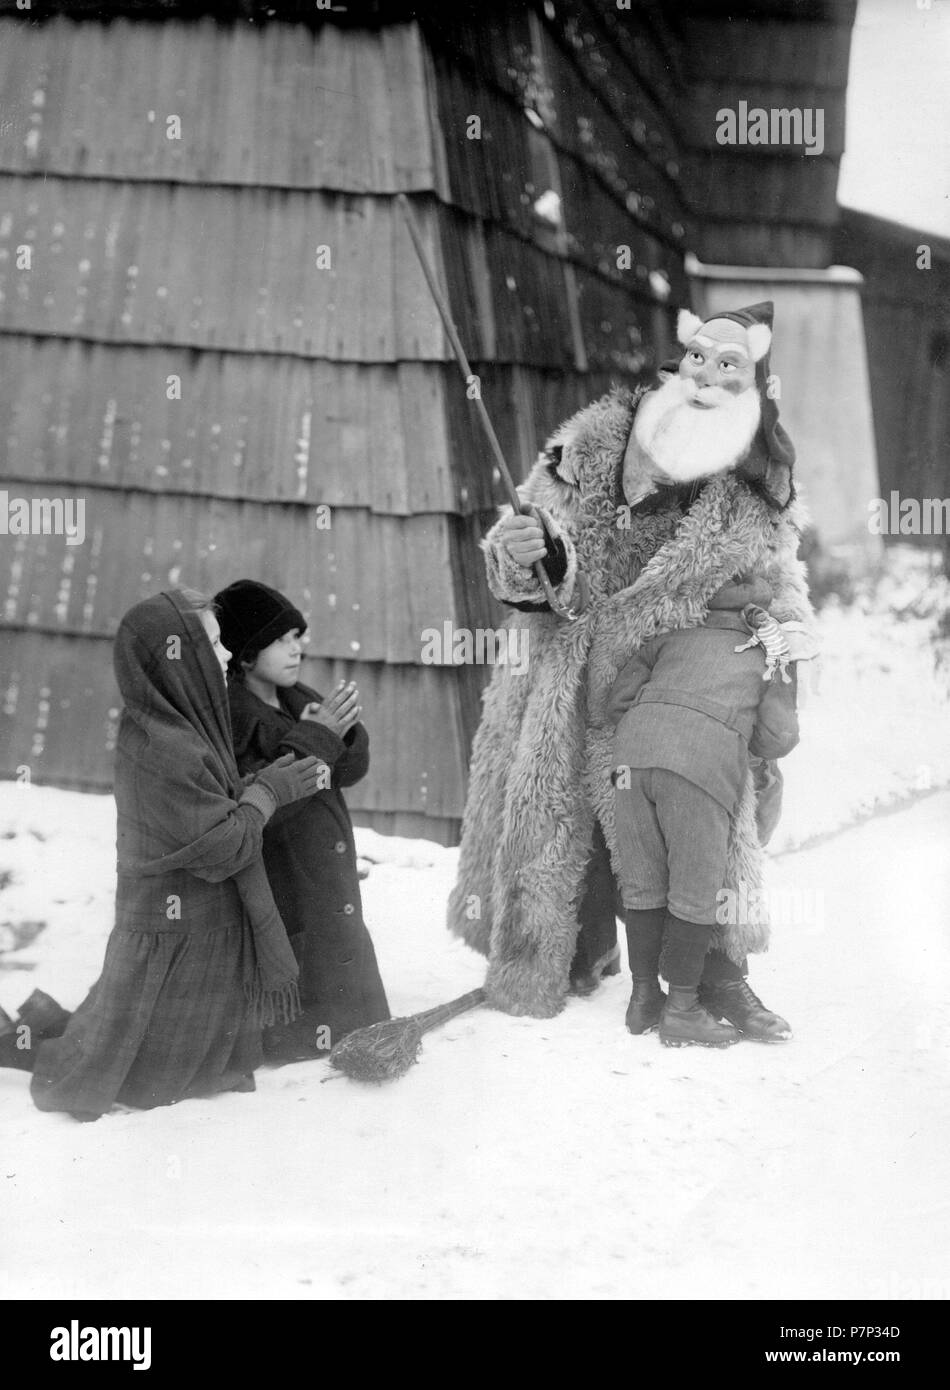 Nikolaus punishes children ca. 1930, exact place unknown, Germany Stock Photo